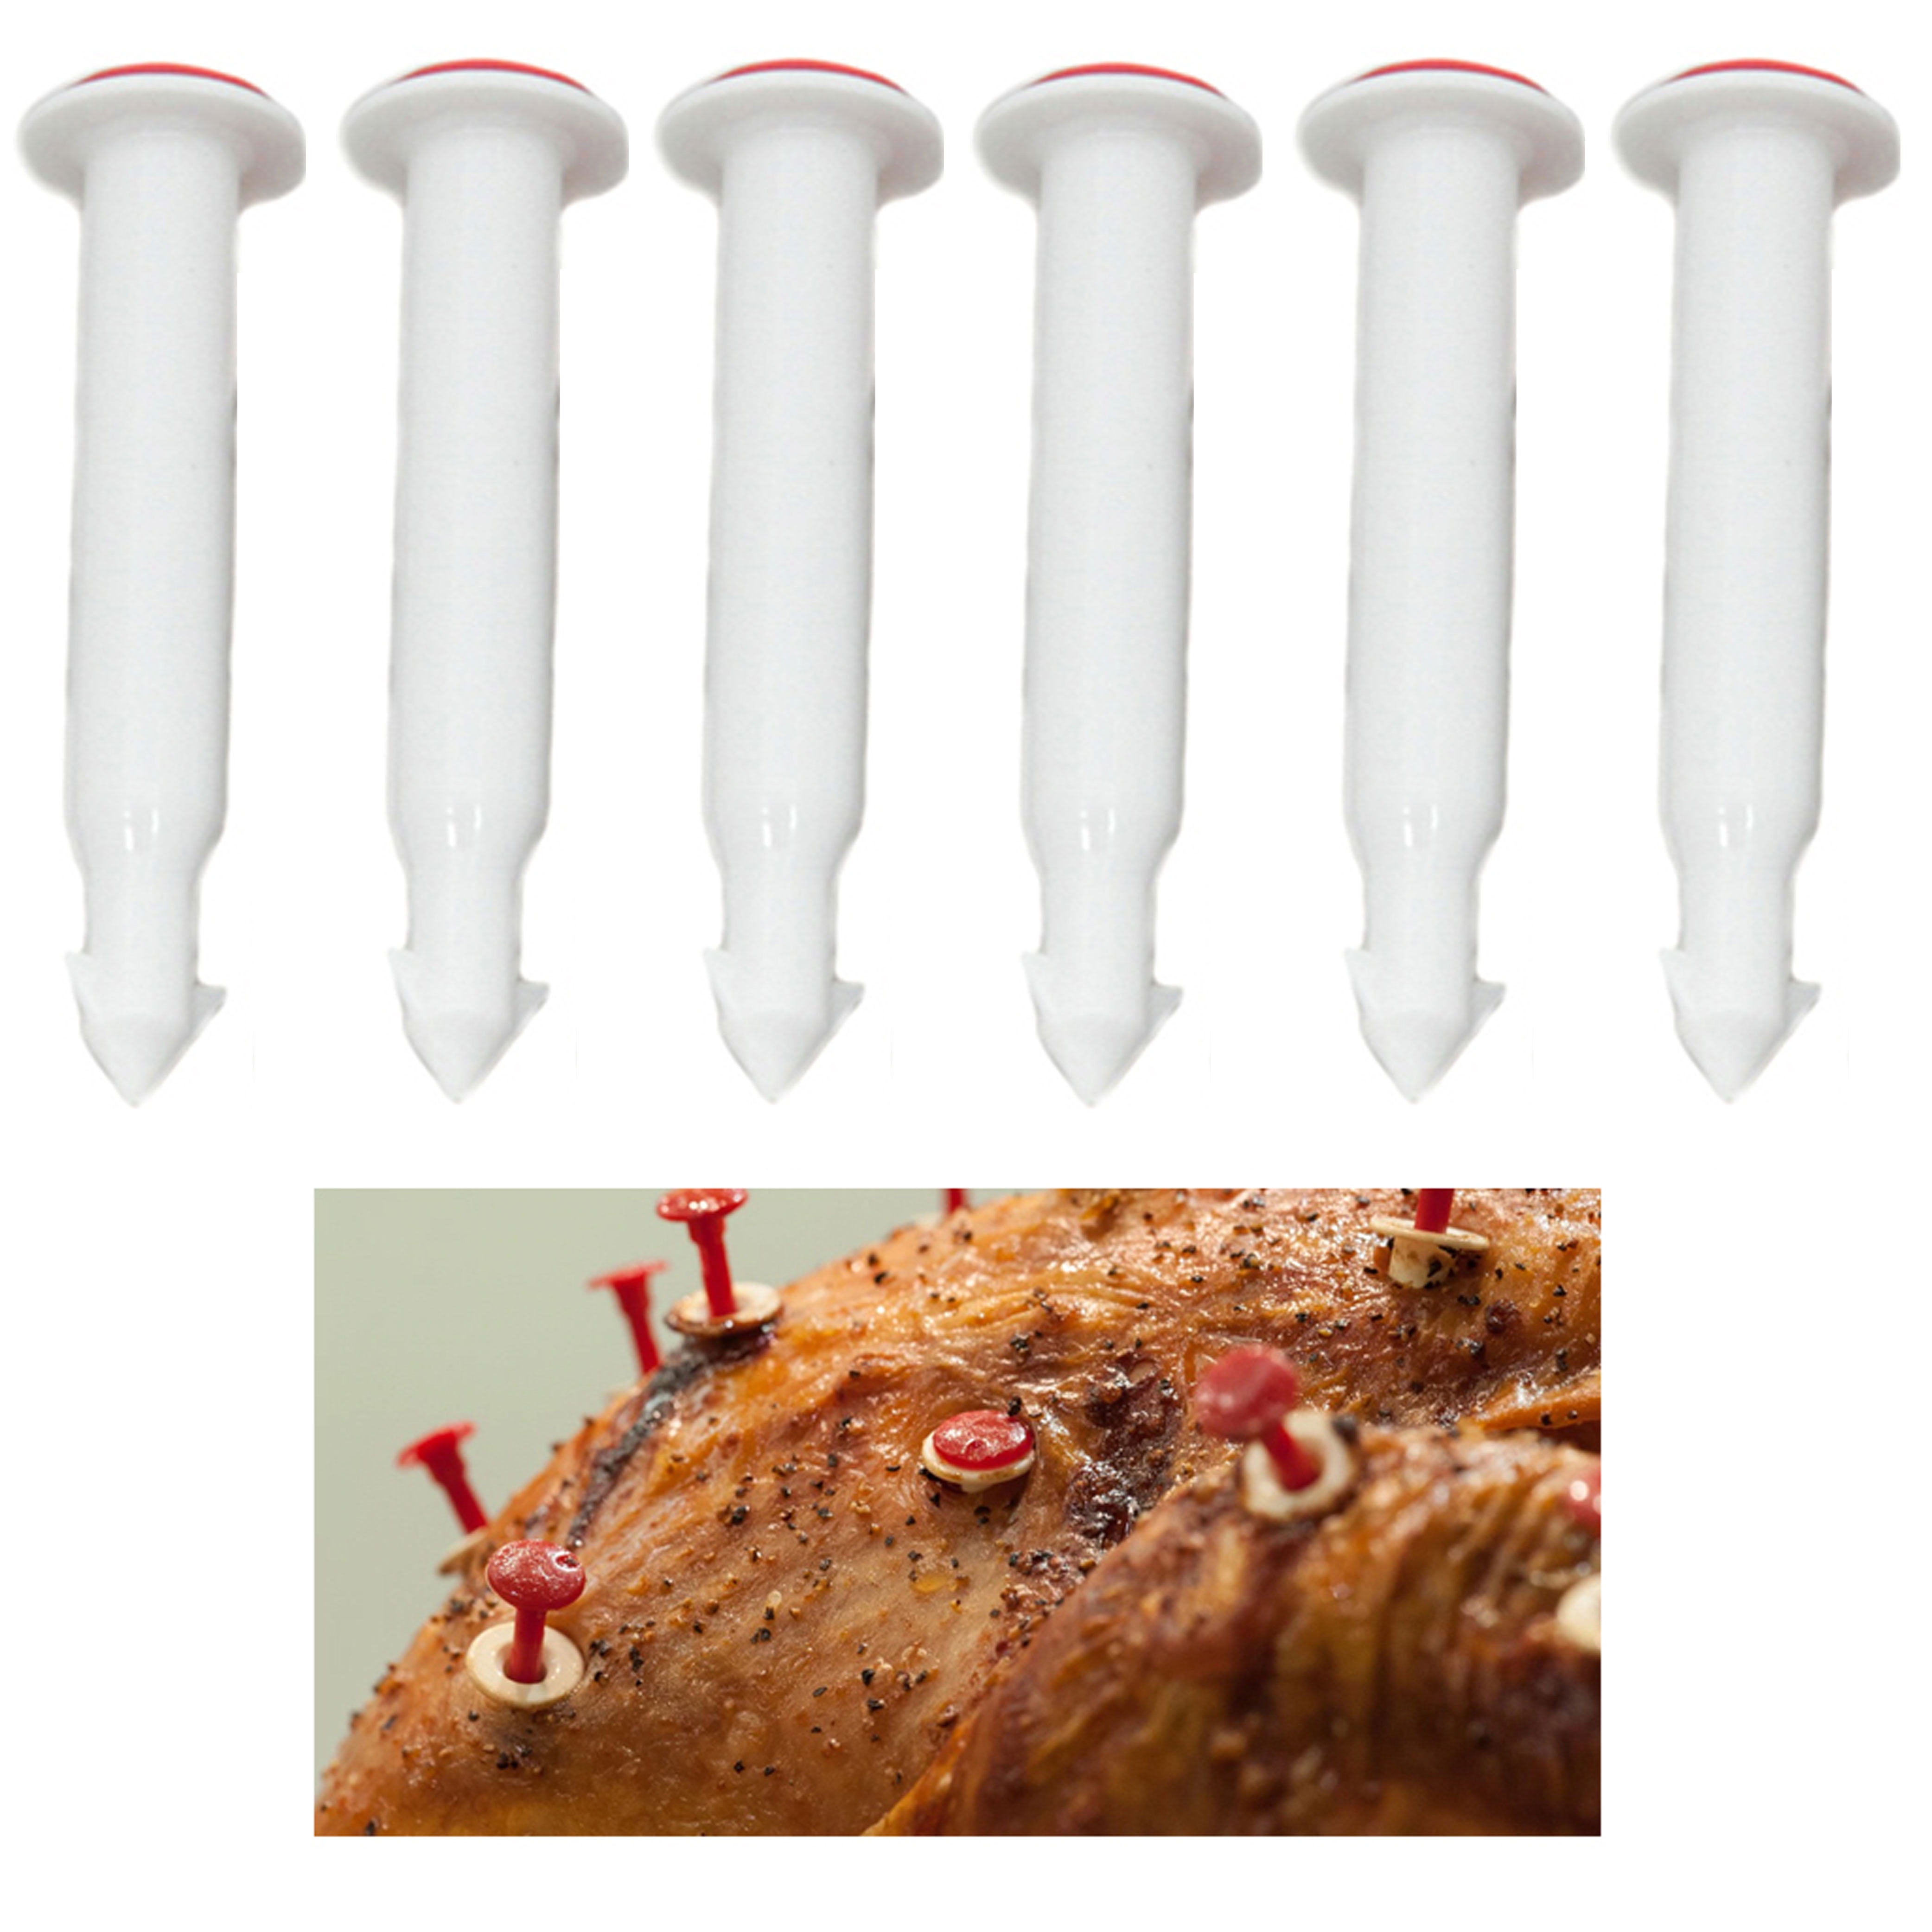 Turkey Temperature Meters Thermometer Pop Up Cooking Thermometer for Oven  Cooking Poultry Turkey Chicken Meat Beef 1 6 12Pcs - AliExpress